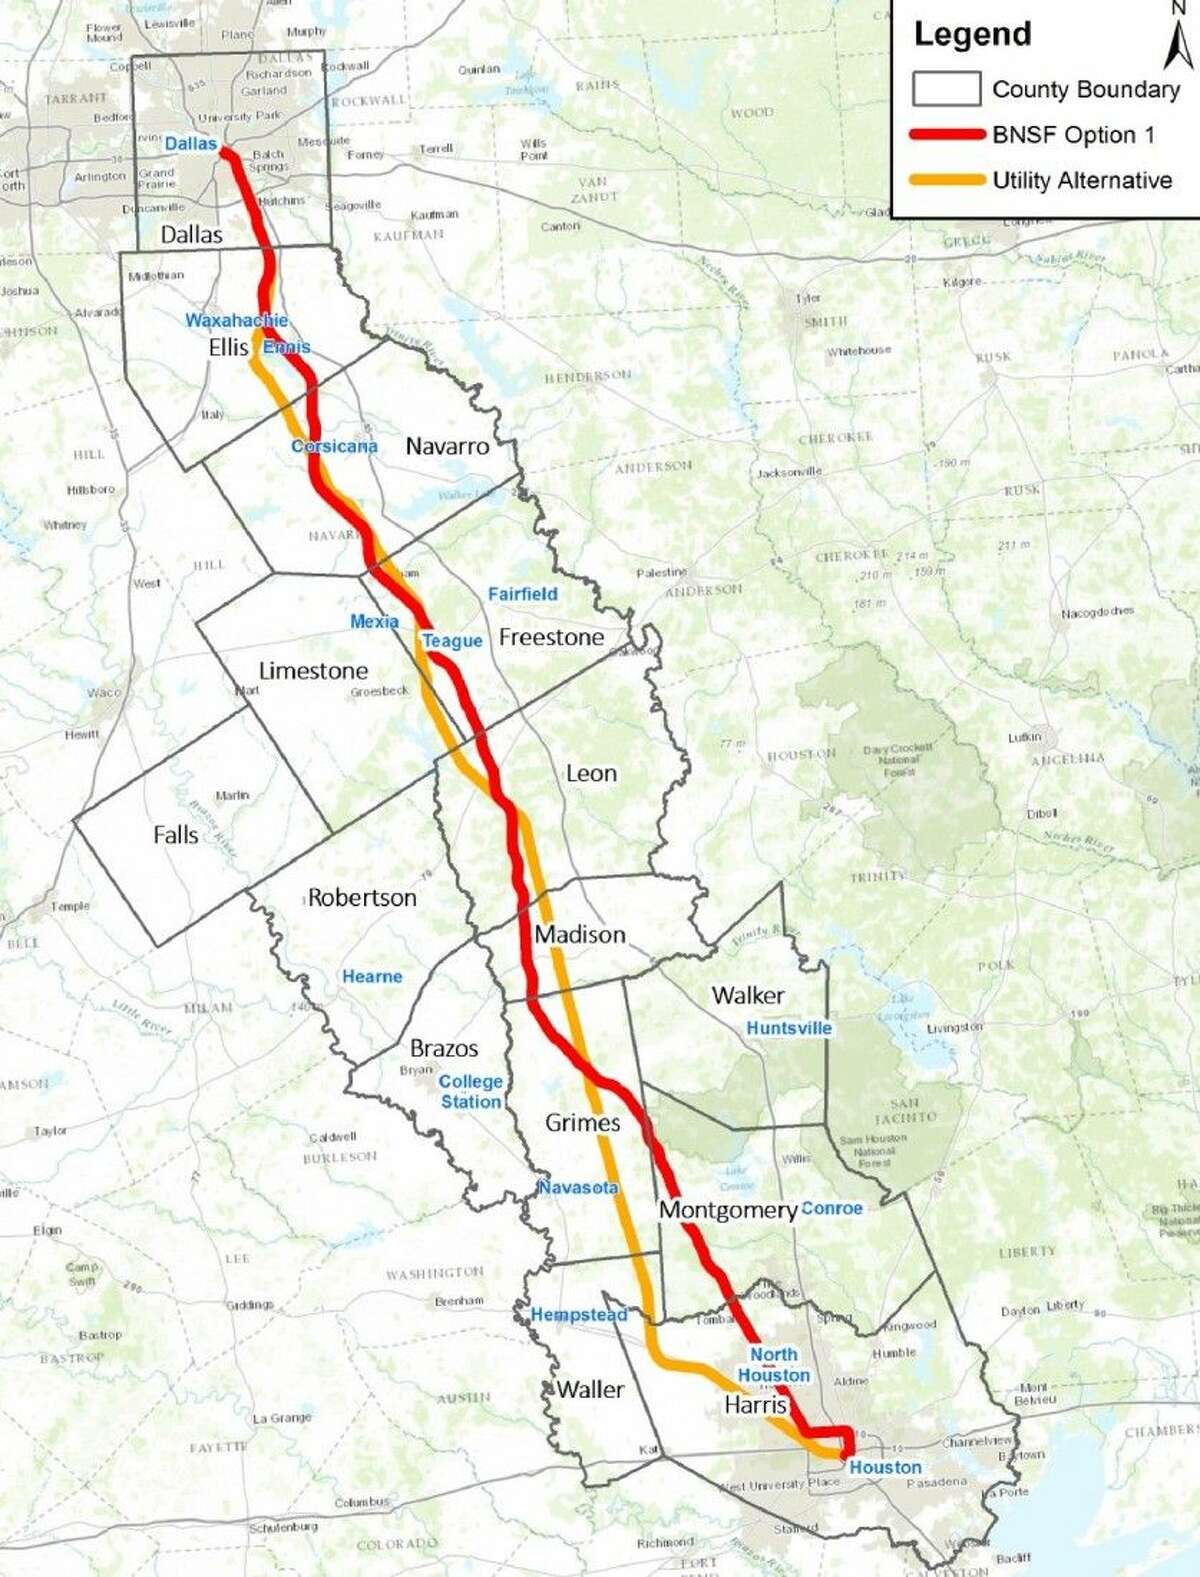 The proposed routes for the Texas Central High-Speed Railway. The orange utility alignment is the preferred route by the company.